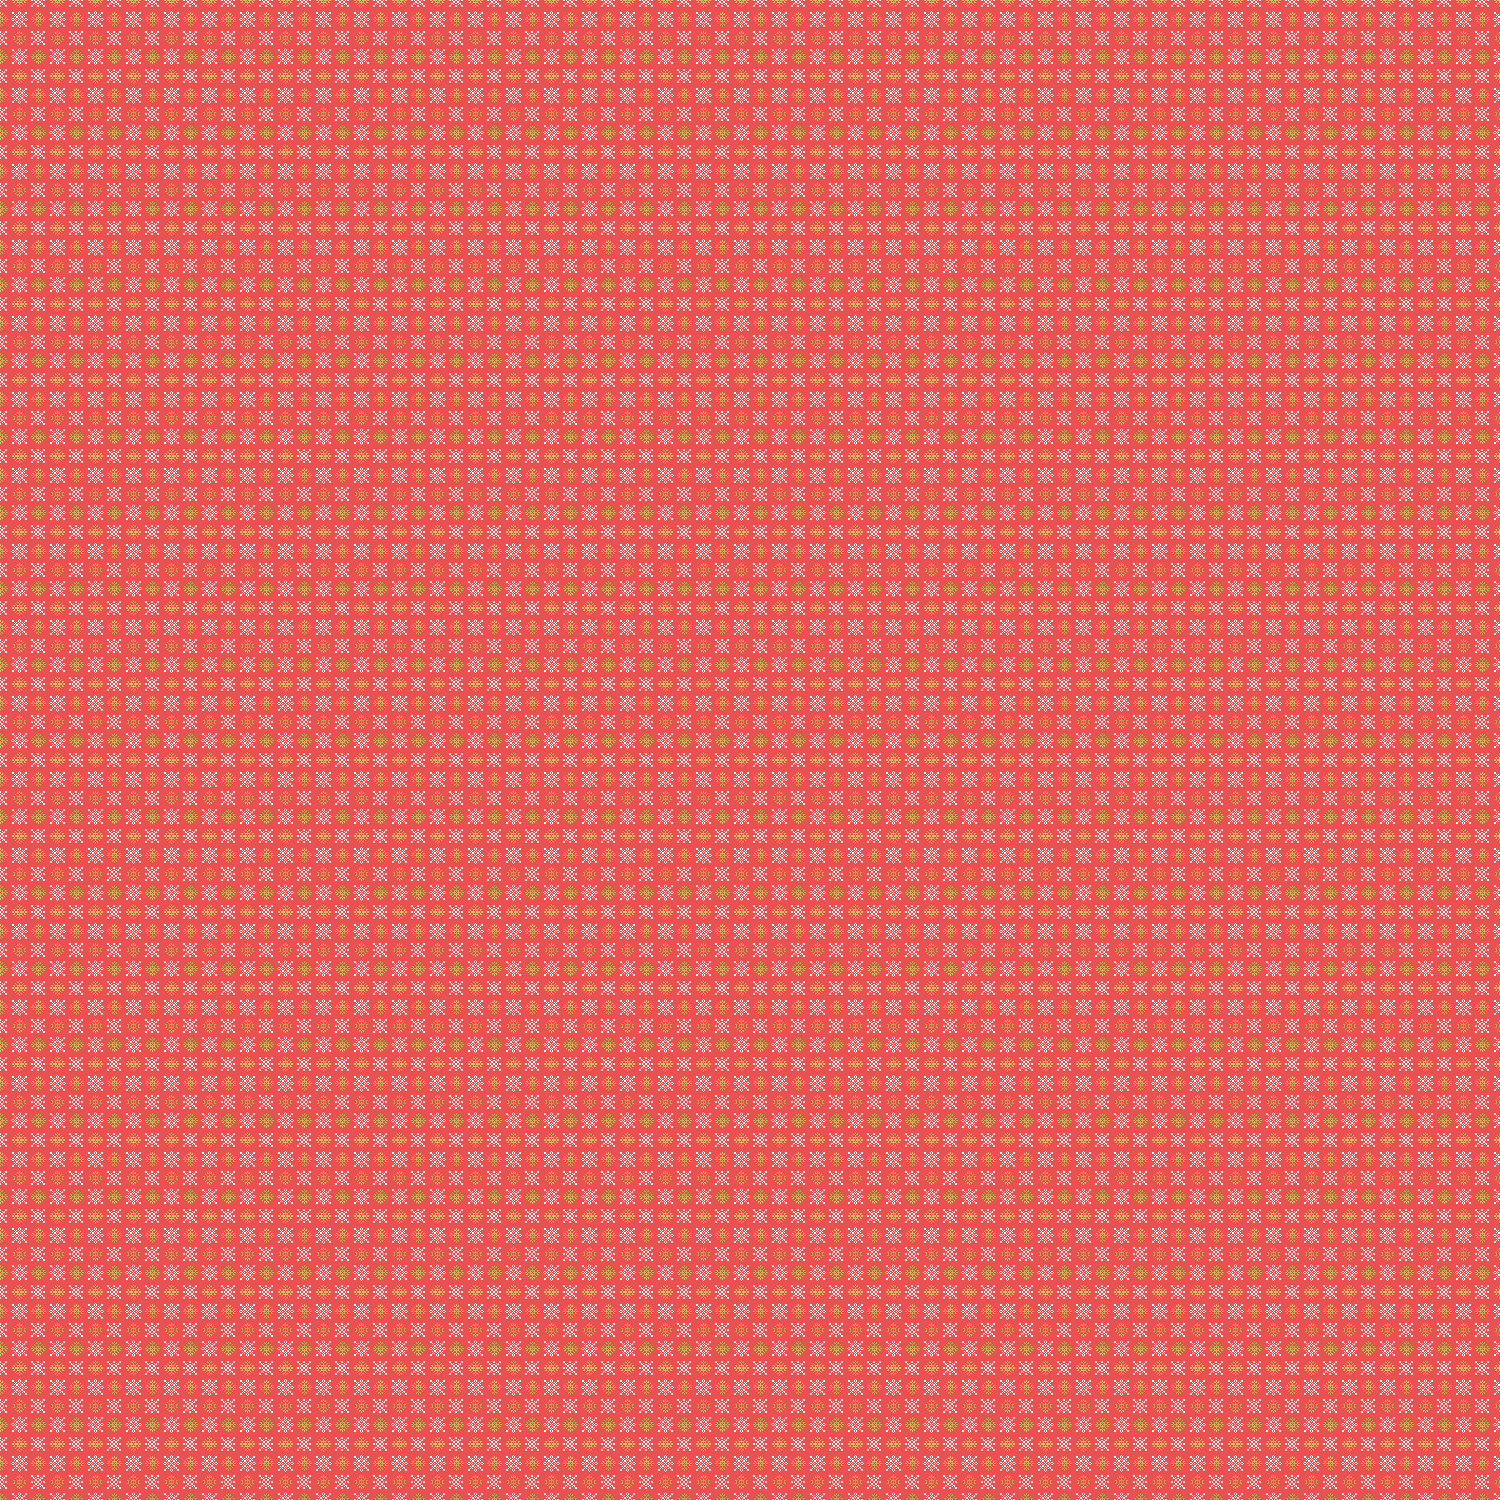 HD Christmas Background Patterns And Wallpaper